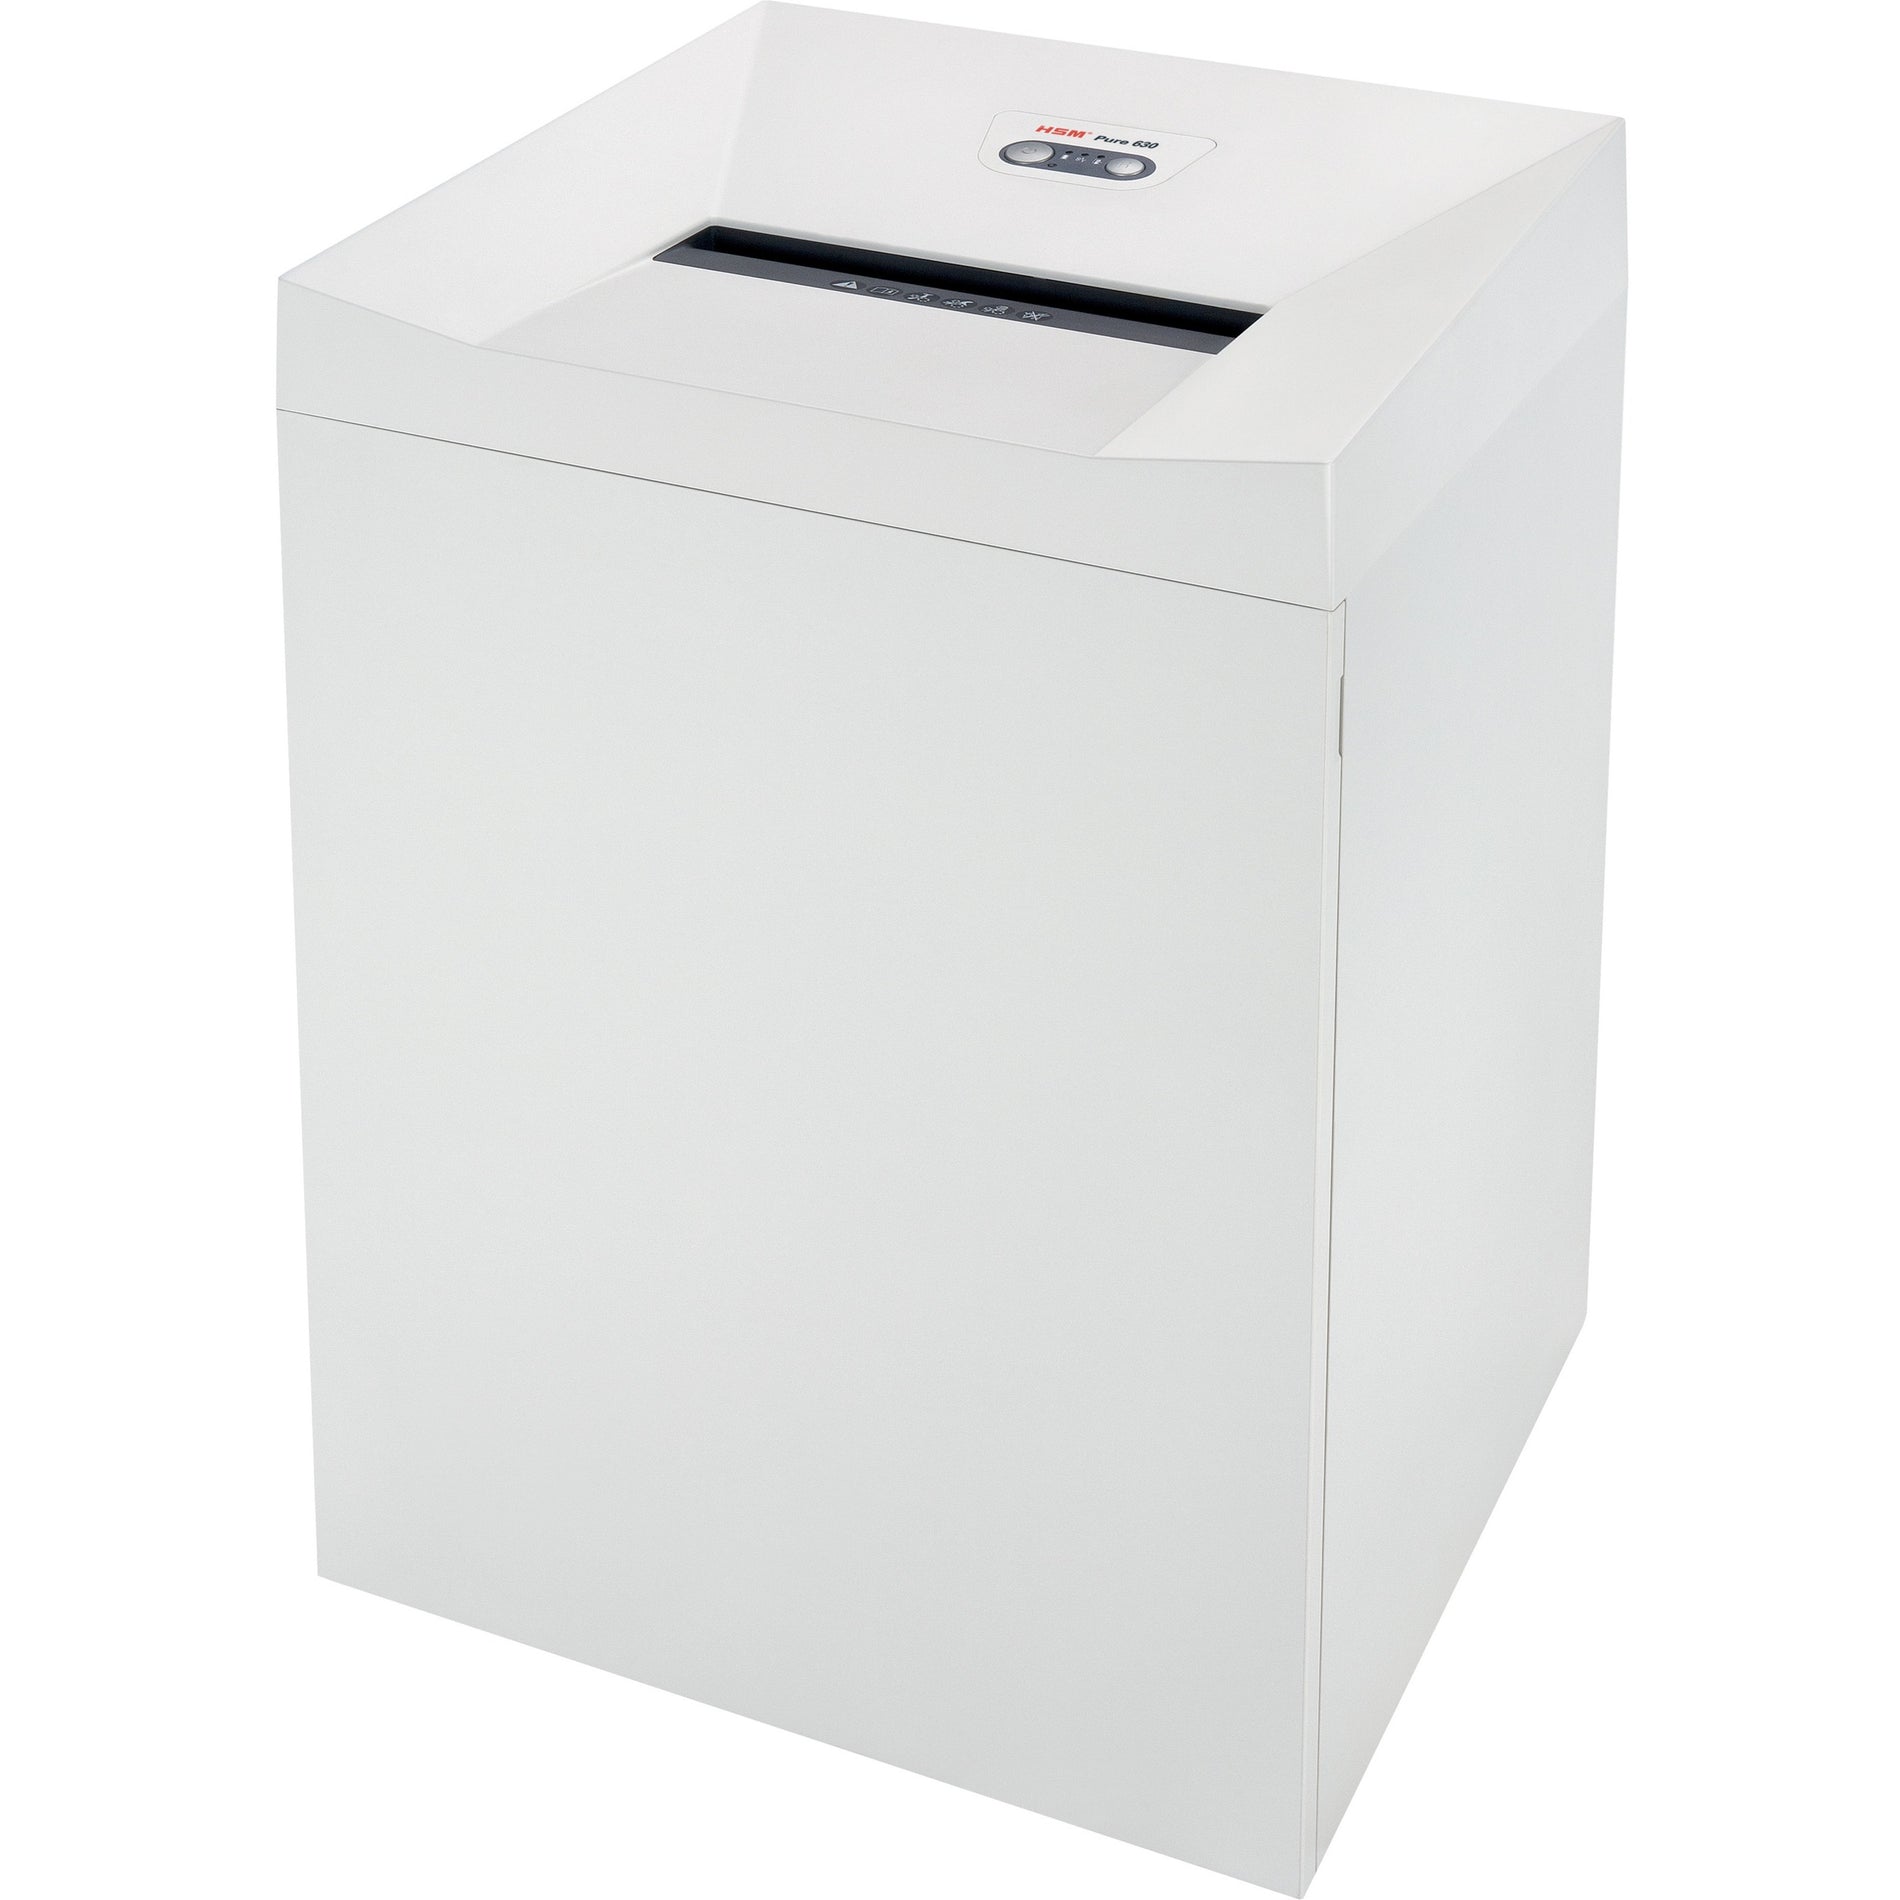 HSM 2363 Pure 630c Cross-Cut Shredder, 27-Sheet Capacity, Quiet Operation, Overload Protection